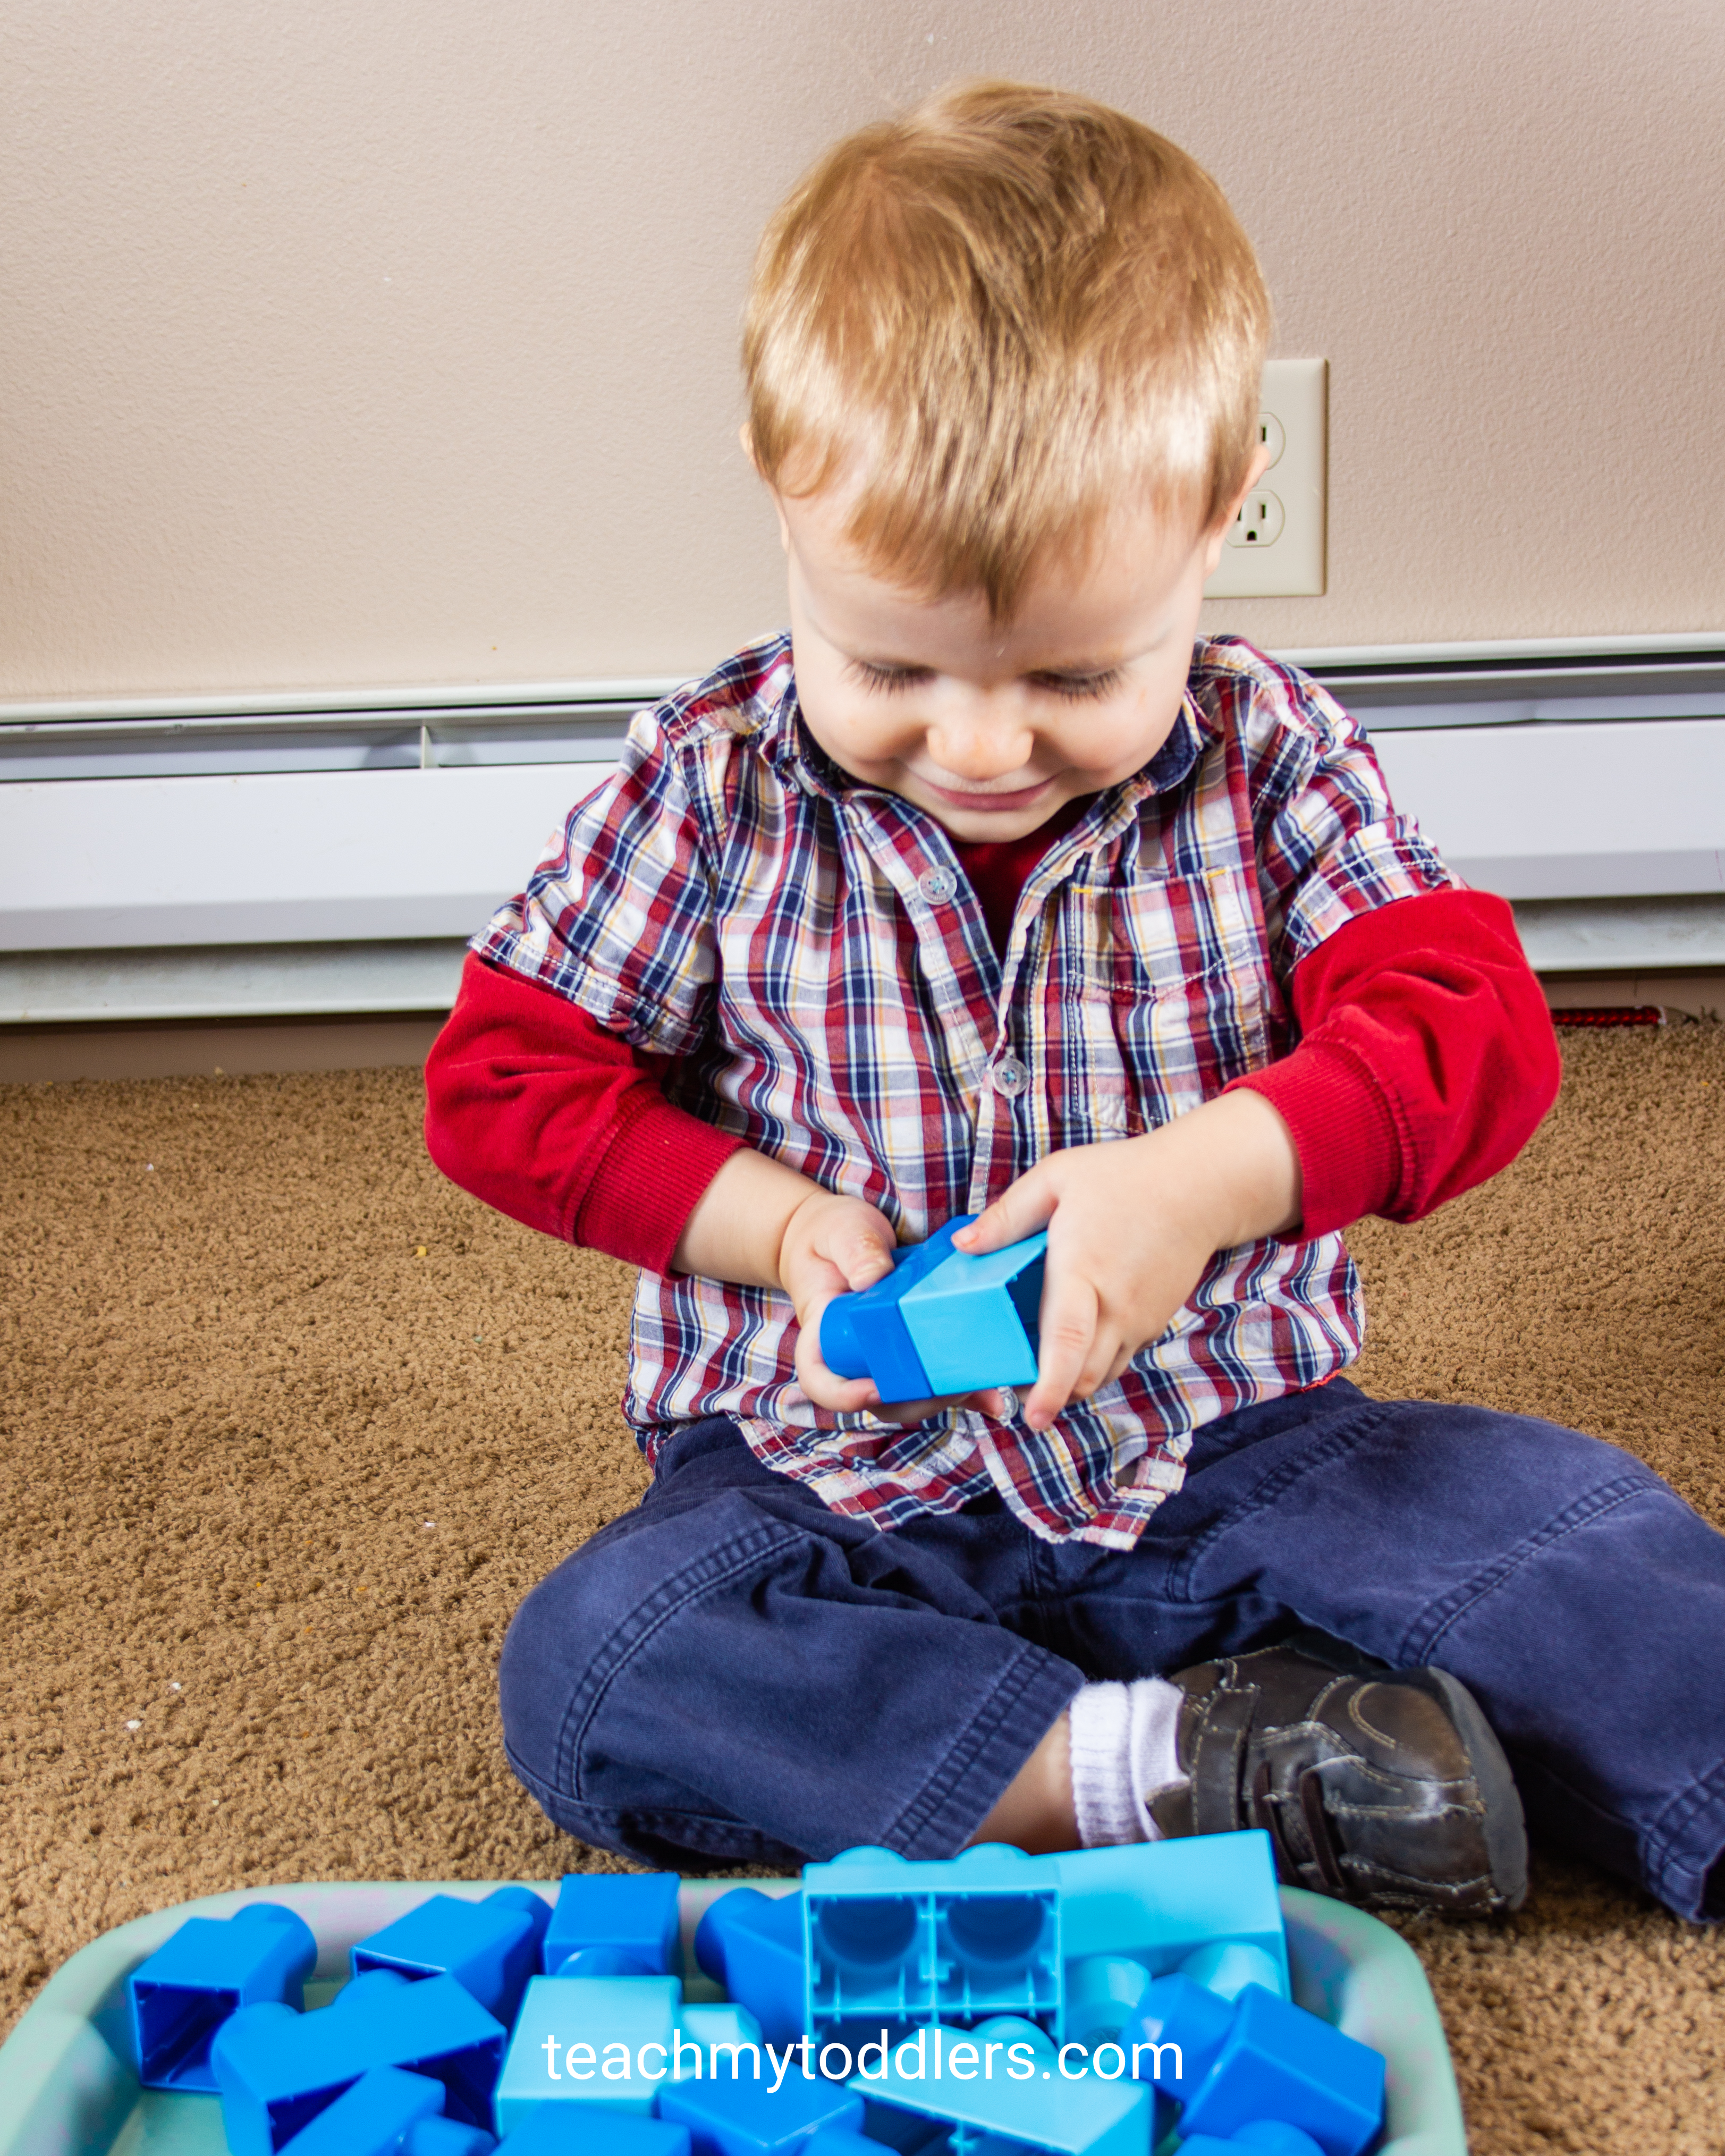 Use these great winter activities to teach toddlers about winter